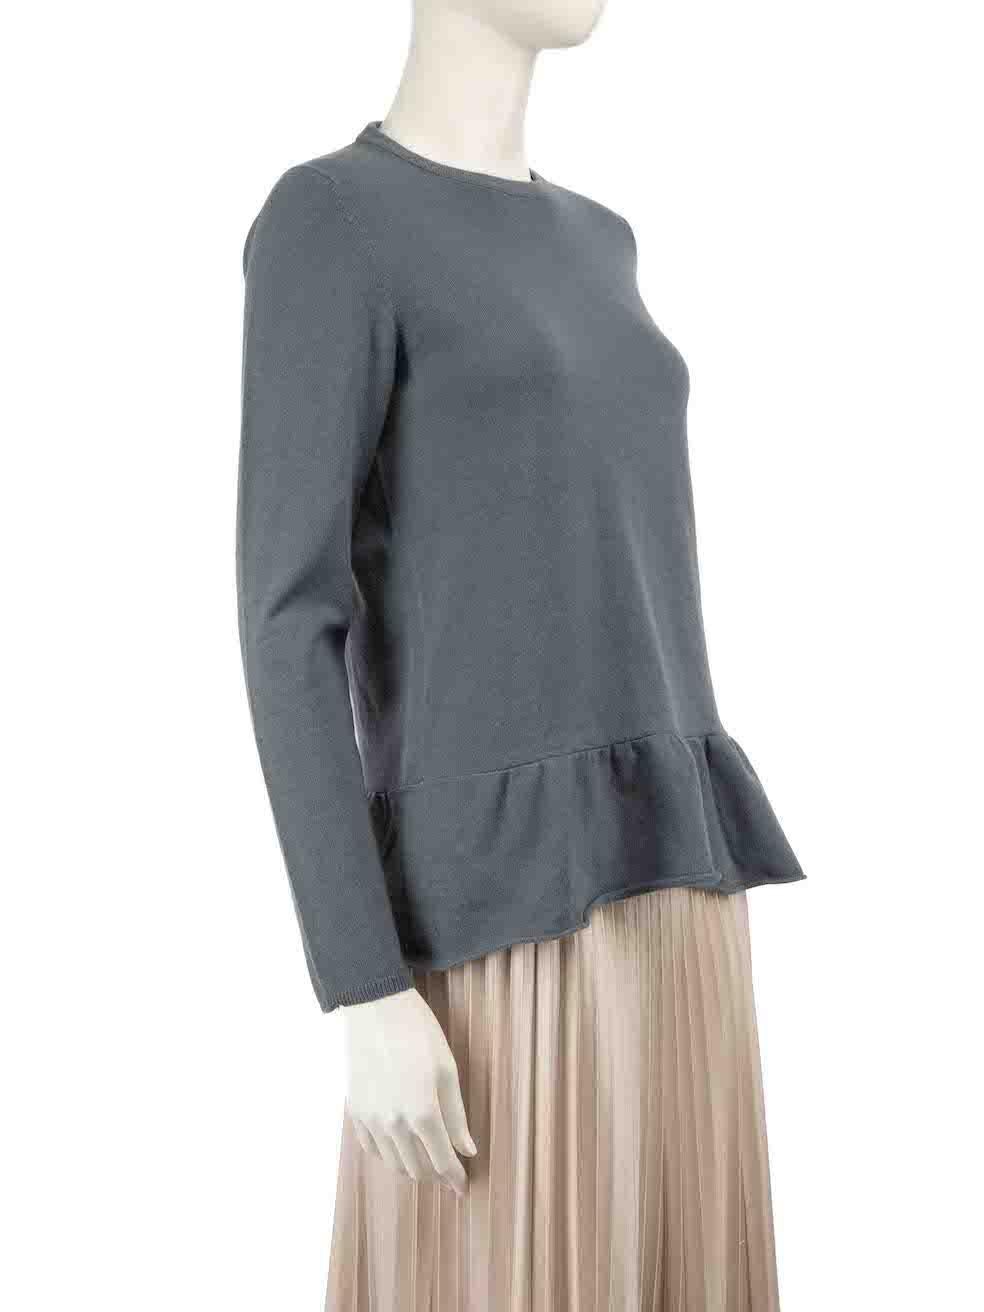 CONDITION is Very good. Hardly any visible wear to jumper is evident on this used Brunello Cucinelli designer resale item.
 
 
 
 Details
 
 
 Blue
 
 Cashmere
 
 Knit jumper
 
 Round neck
 
 Long sleeves
 
 Ruffle hem
 
 
 
 
 
 Made in Italy
 
 
